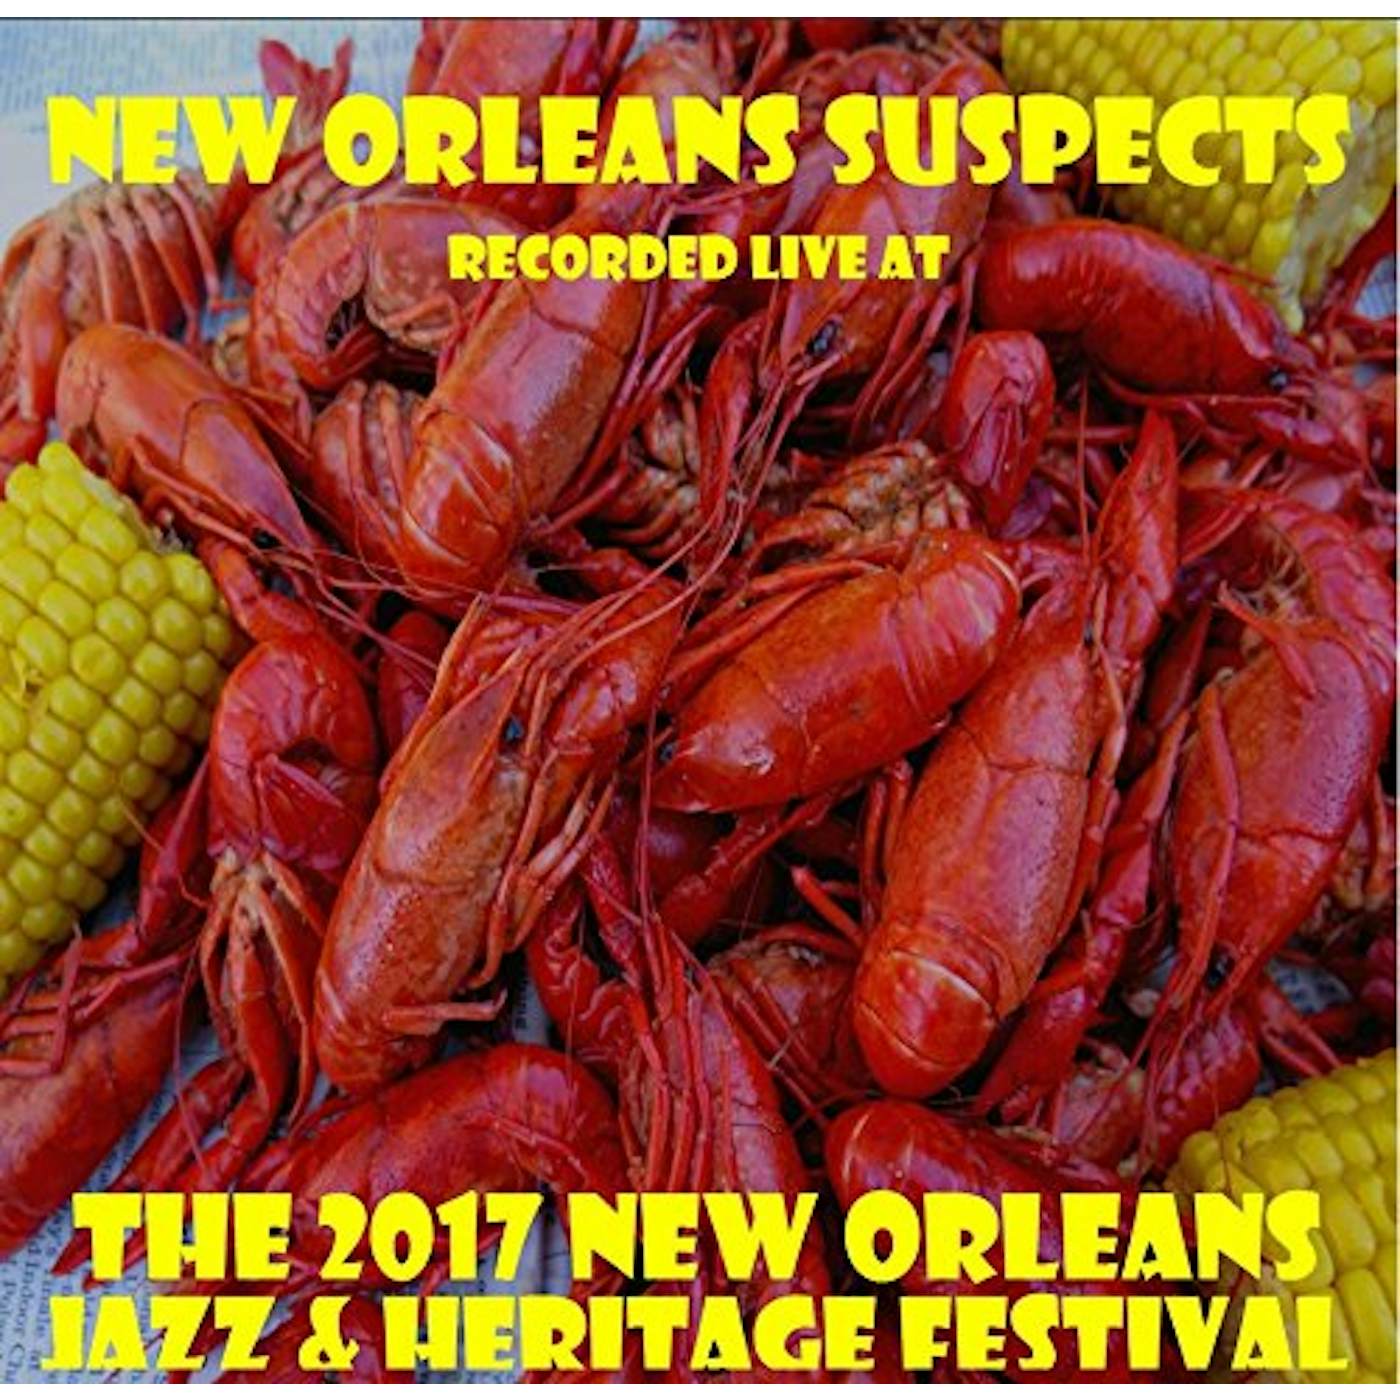 The New Orleans Suspects LIVE AT JAZZFEST 2017 CD